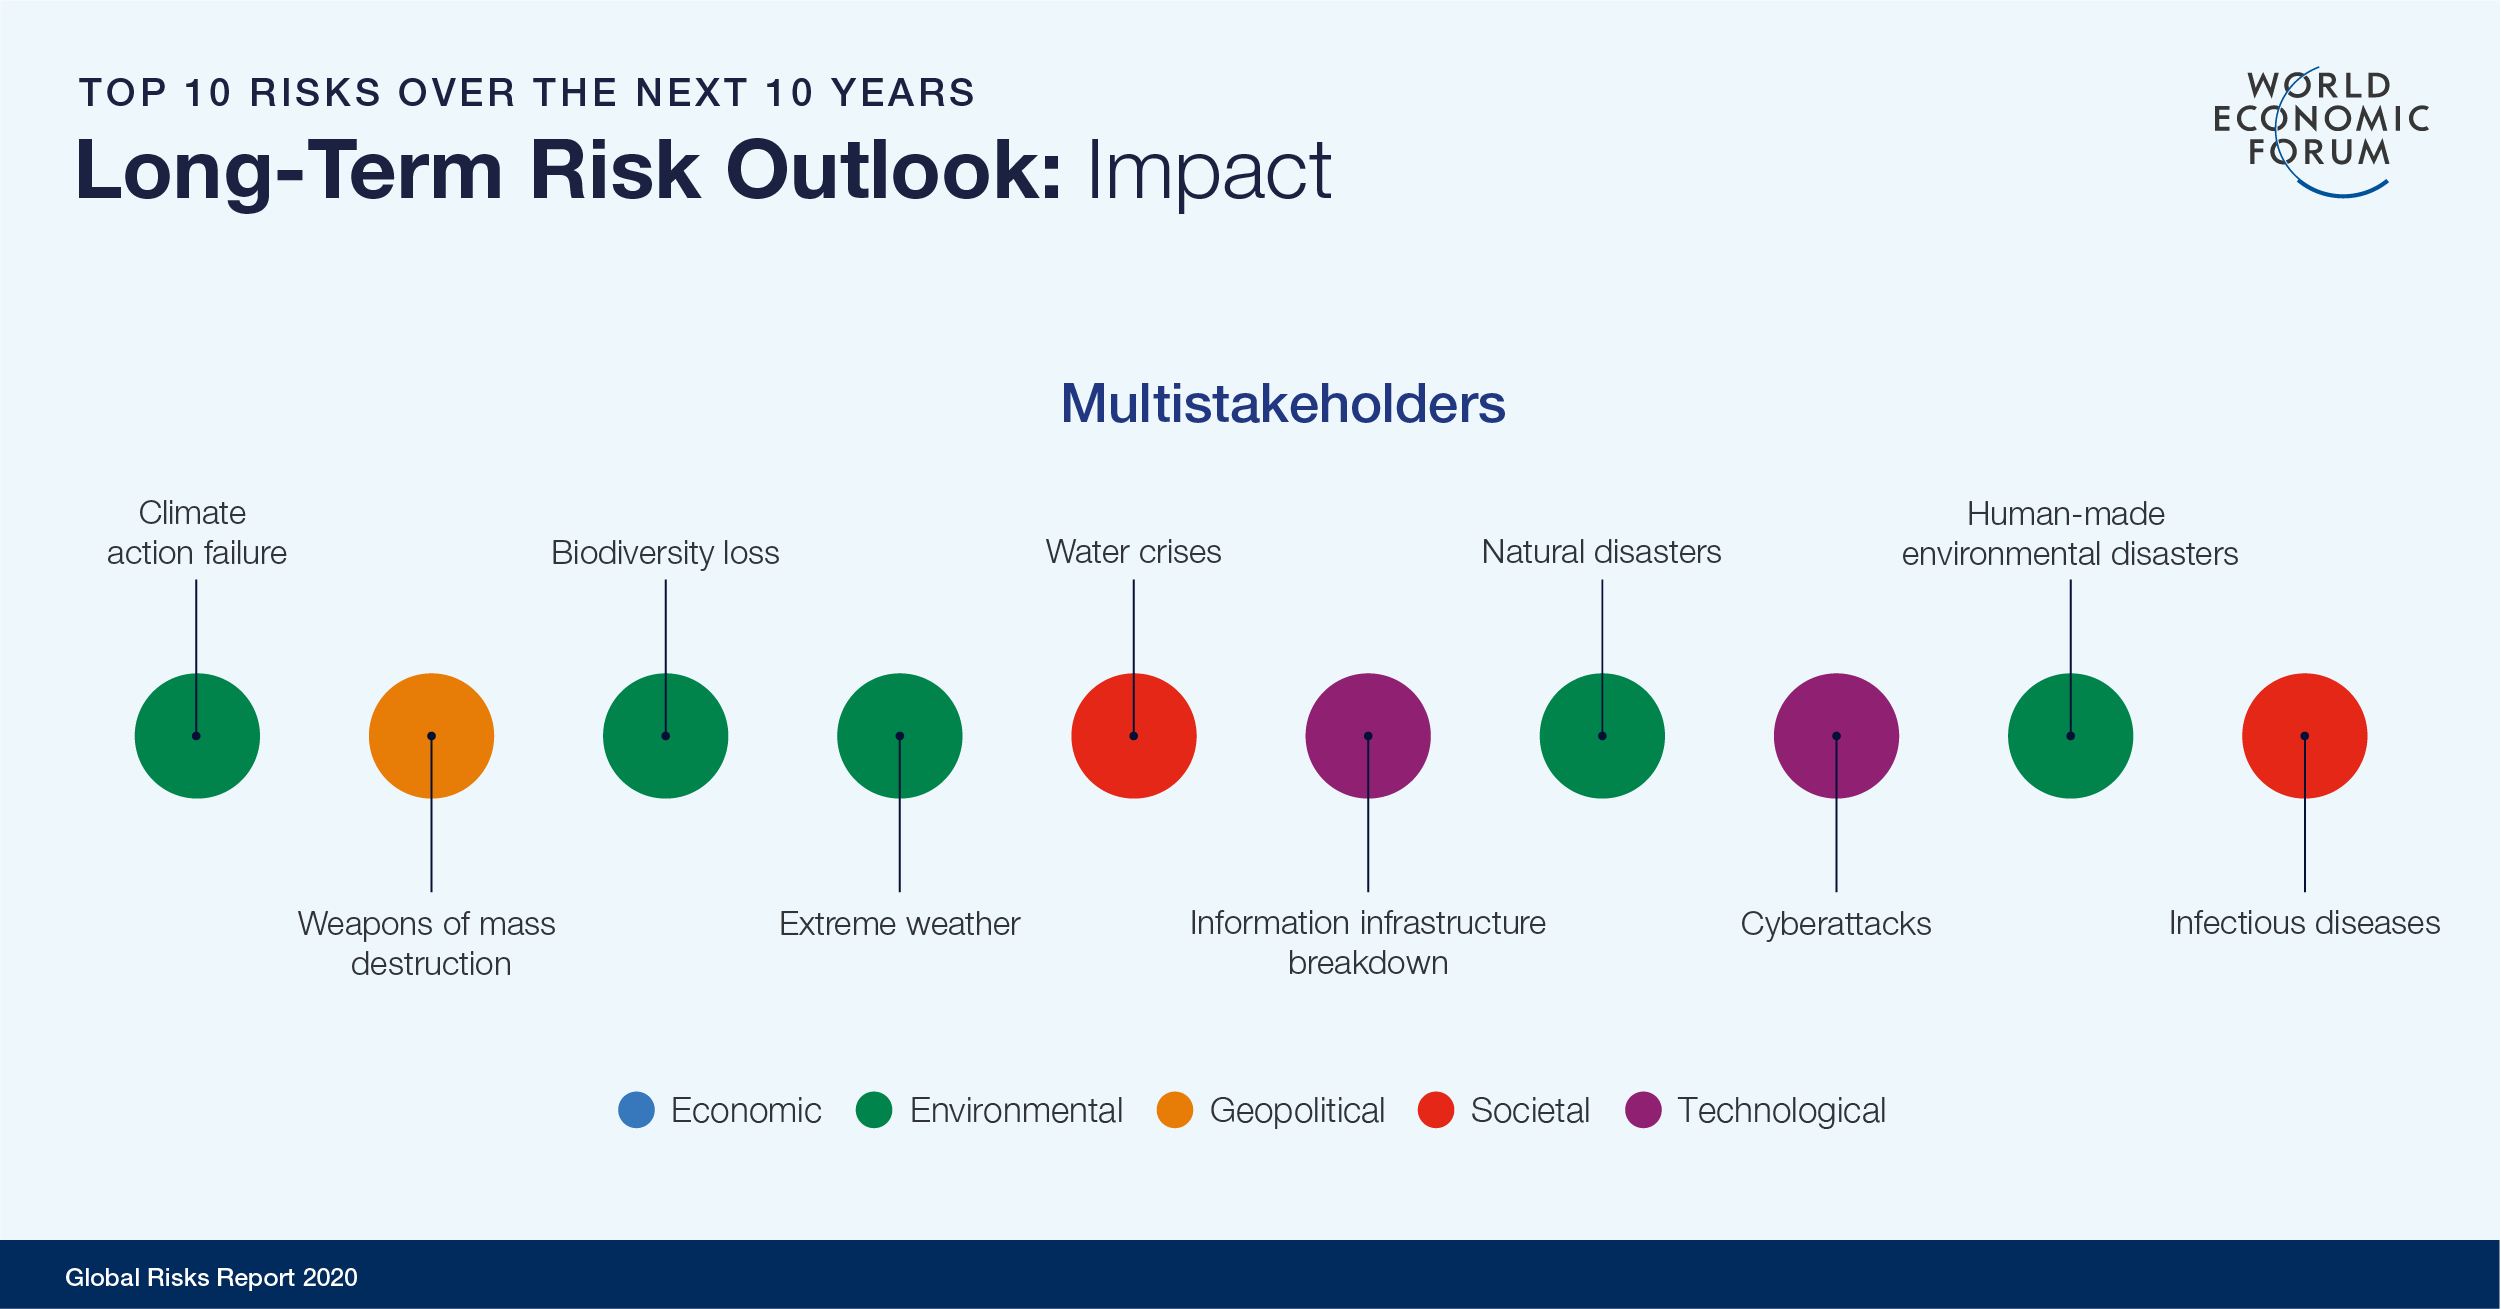 WEF Global Risks Report 2020 Top 10 risks in terms of impact